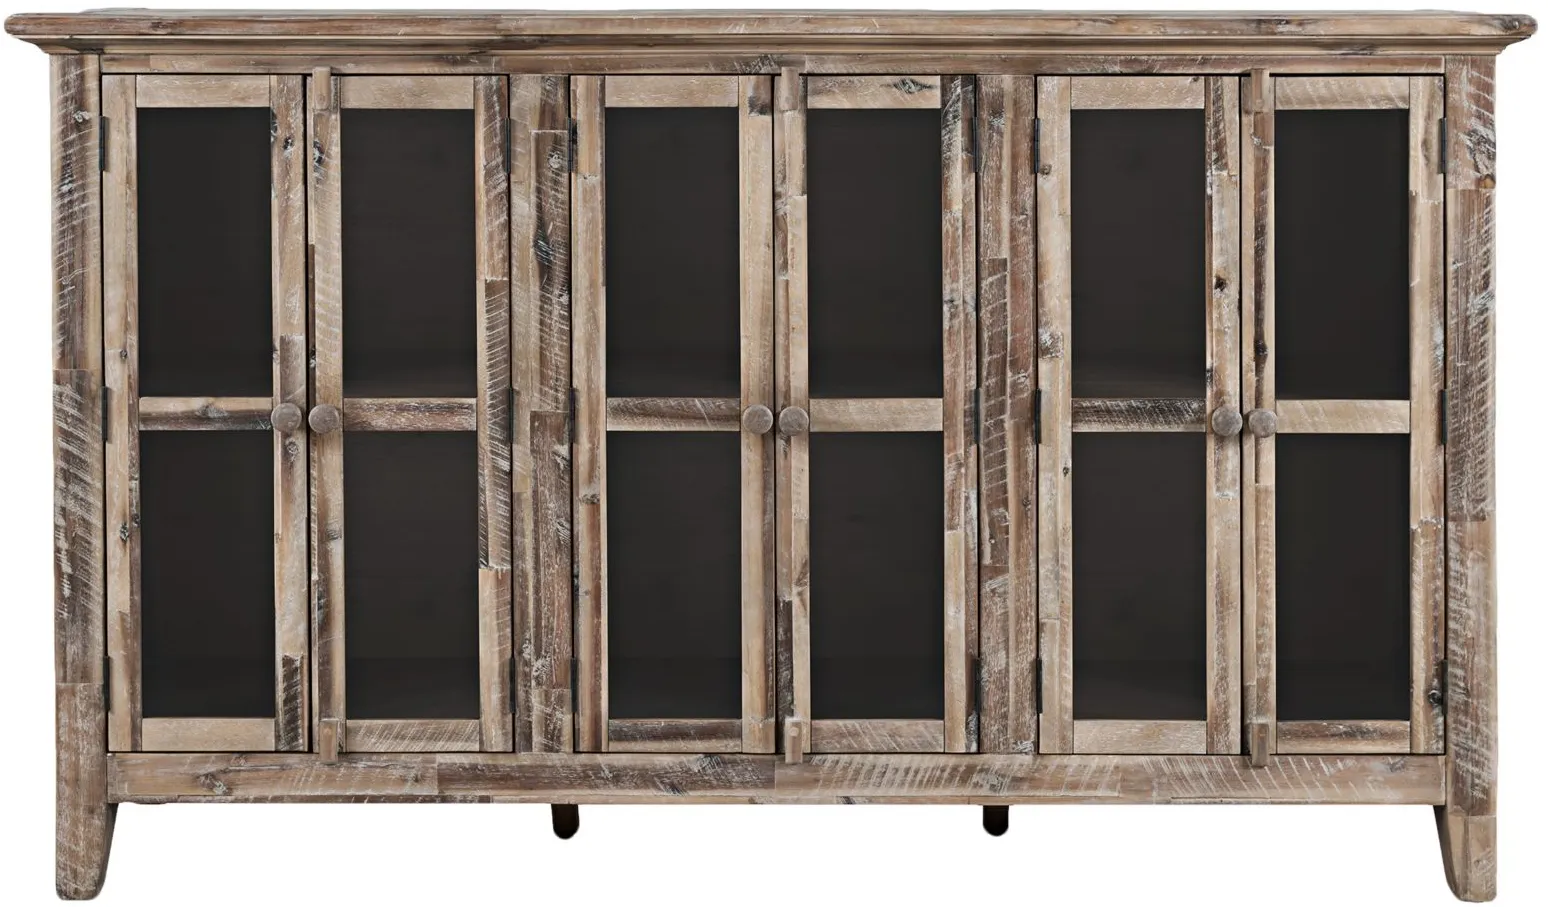 Rustic Shores 70" Accent Cabinet in Grey Wash by Jofran